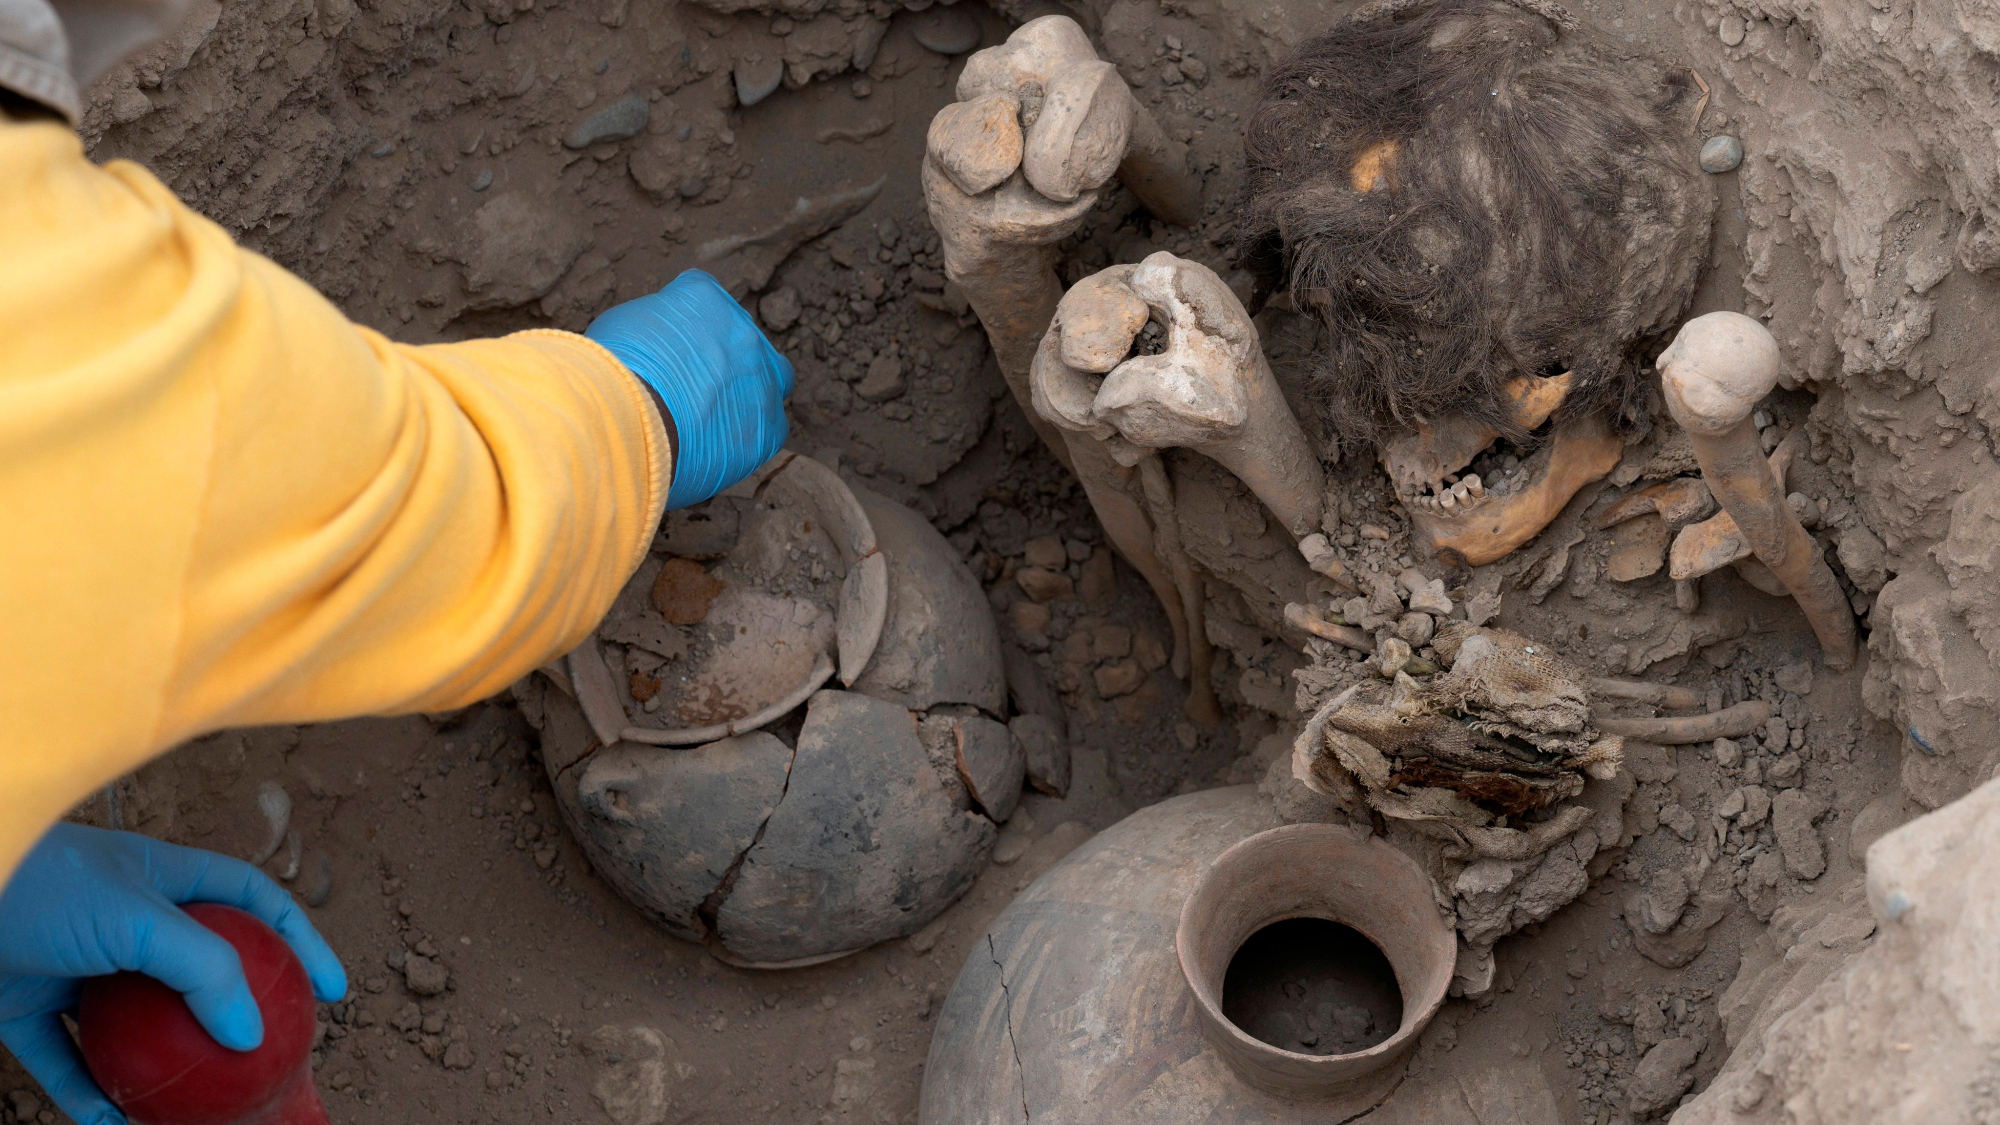 1,000-year-old mummy with full head of hair and intact jaw found in Peru